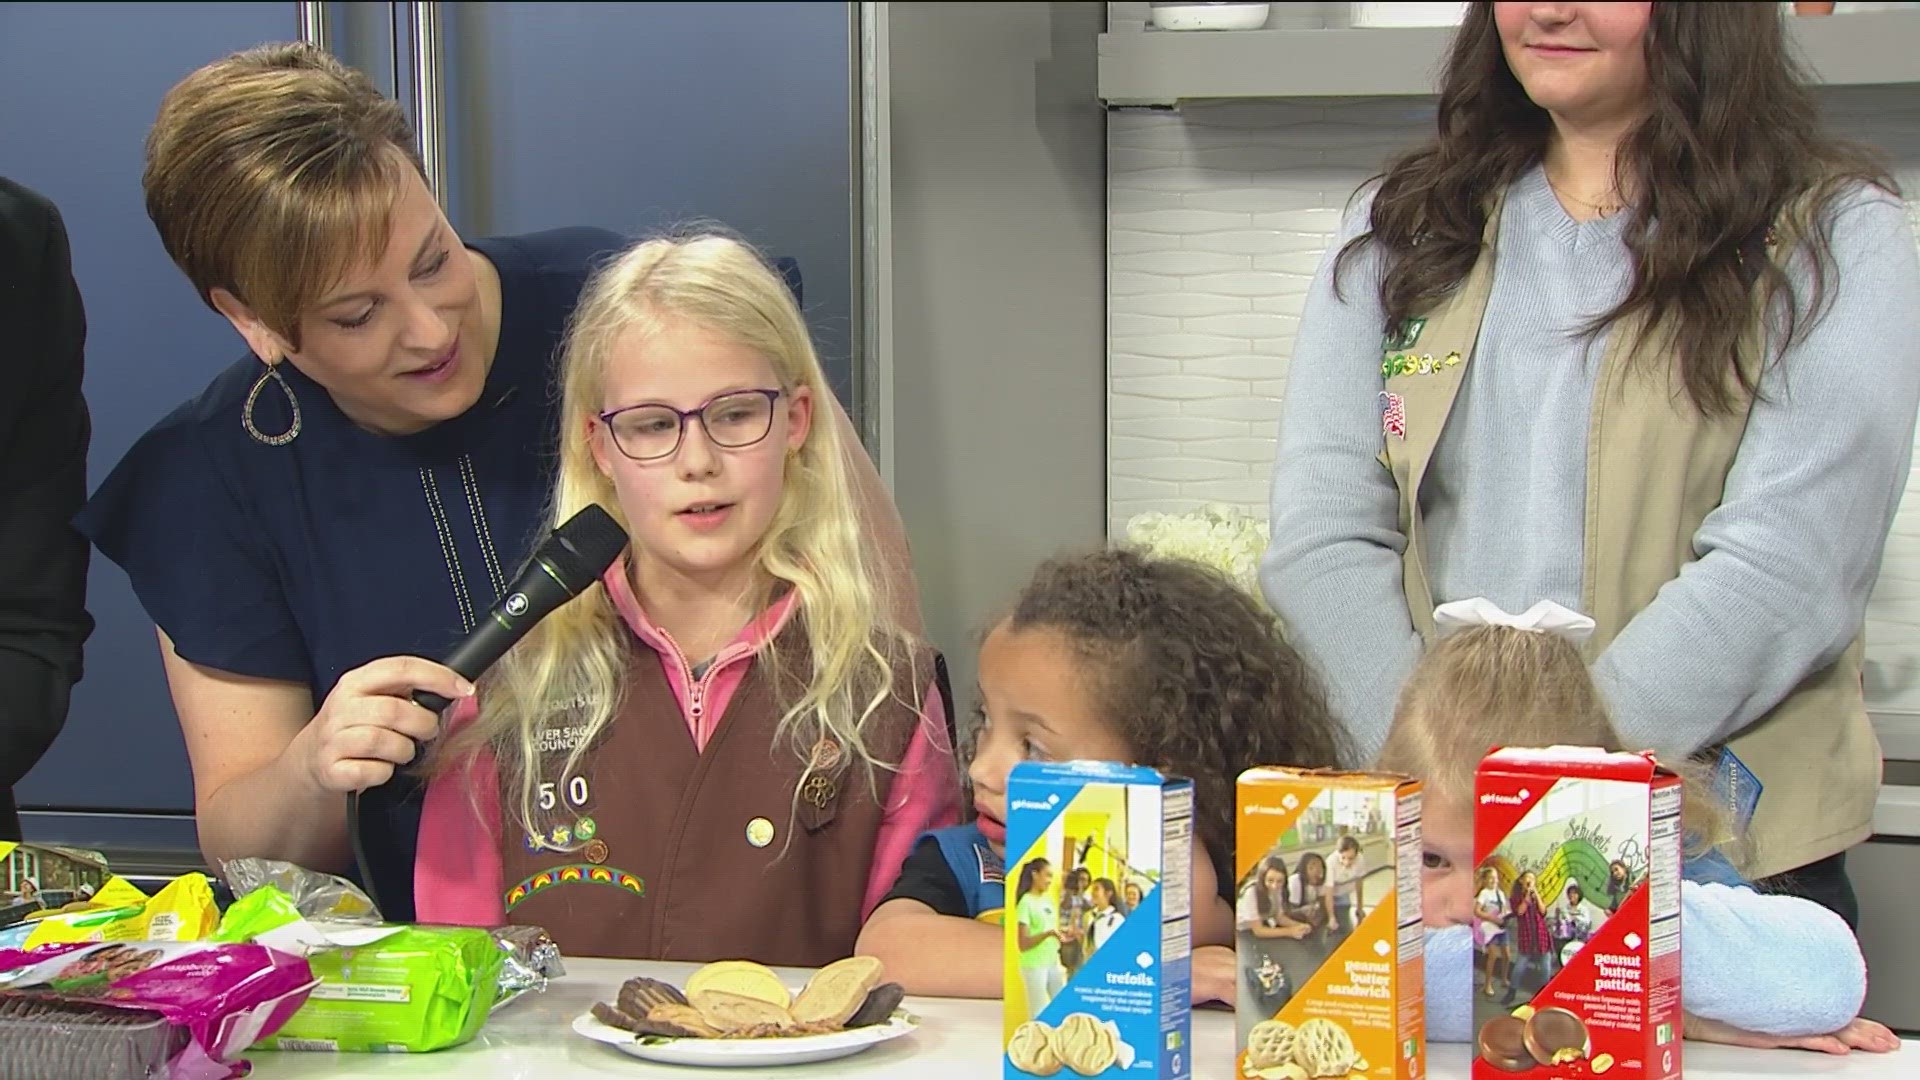 Some members of Girl Scouts of Silver Sage, a southern Idaho group, stopped by to chat and share some samples Thursday morning on Wake Up Idaho.